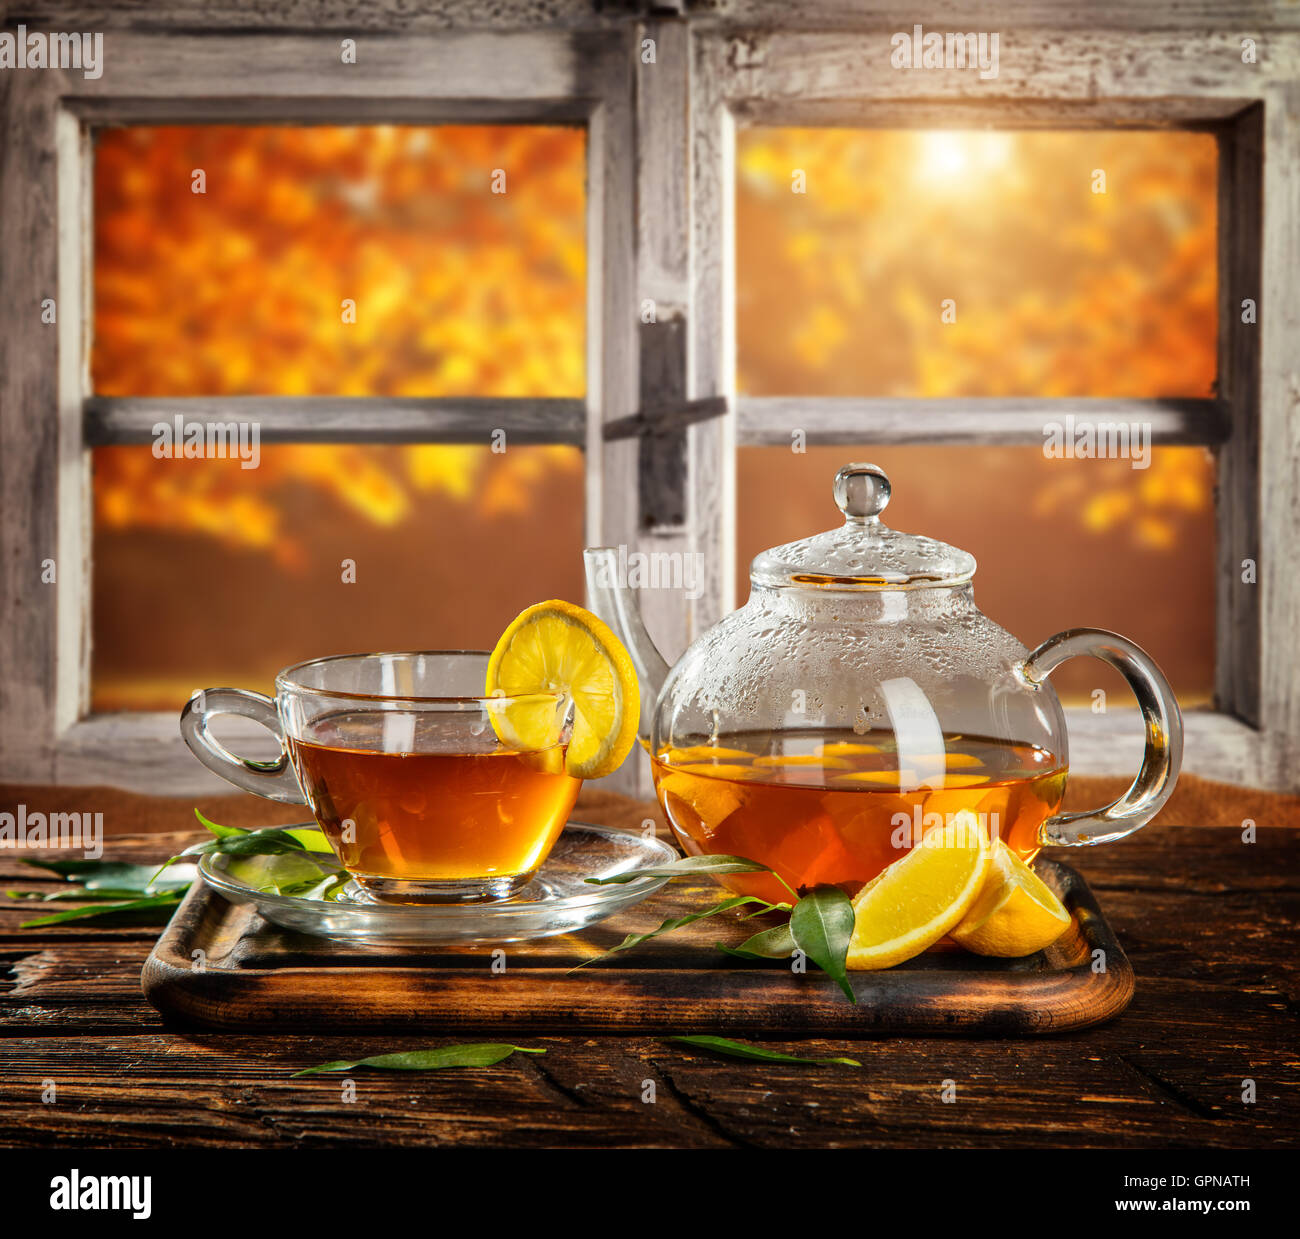 Hot tea in glass tea pot over green background Stock Photo by tenkende